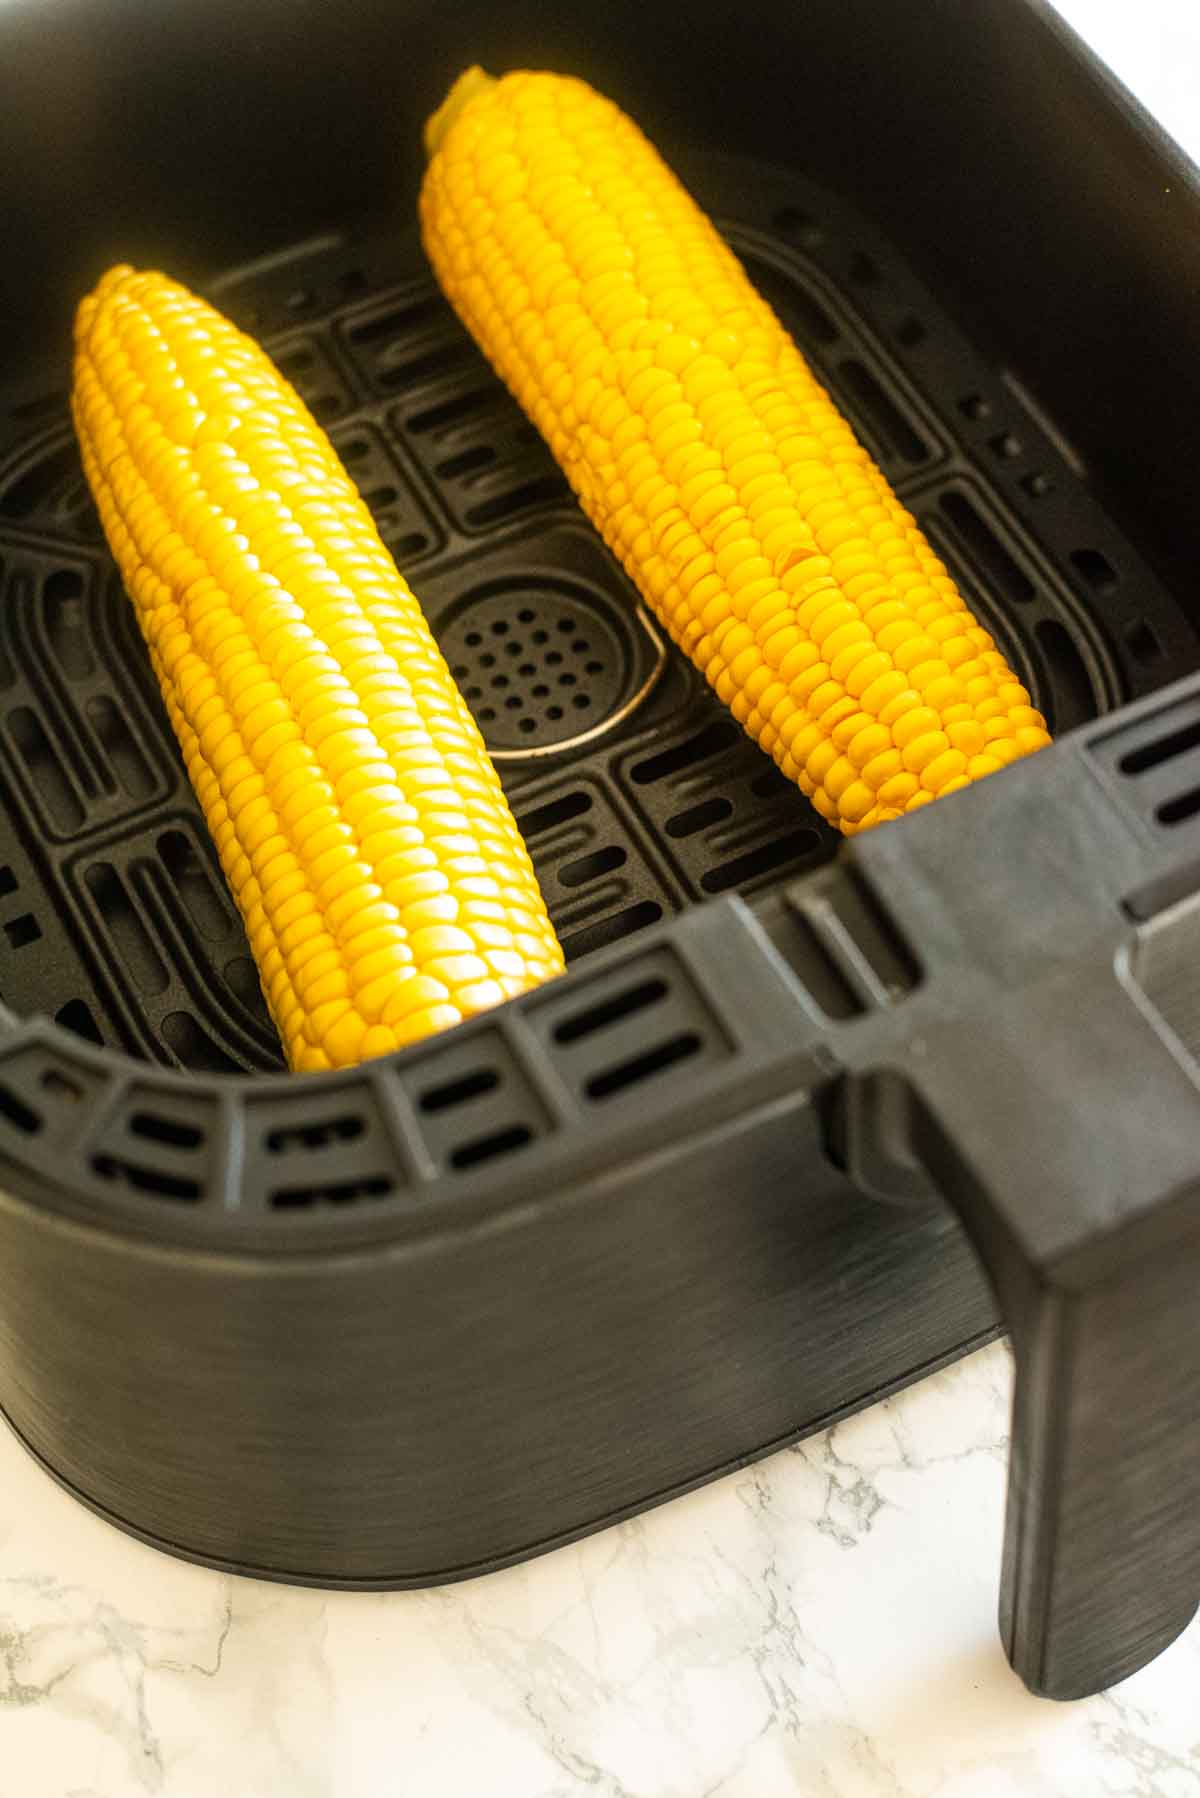 Two corn on the cobs in an air fryer